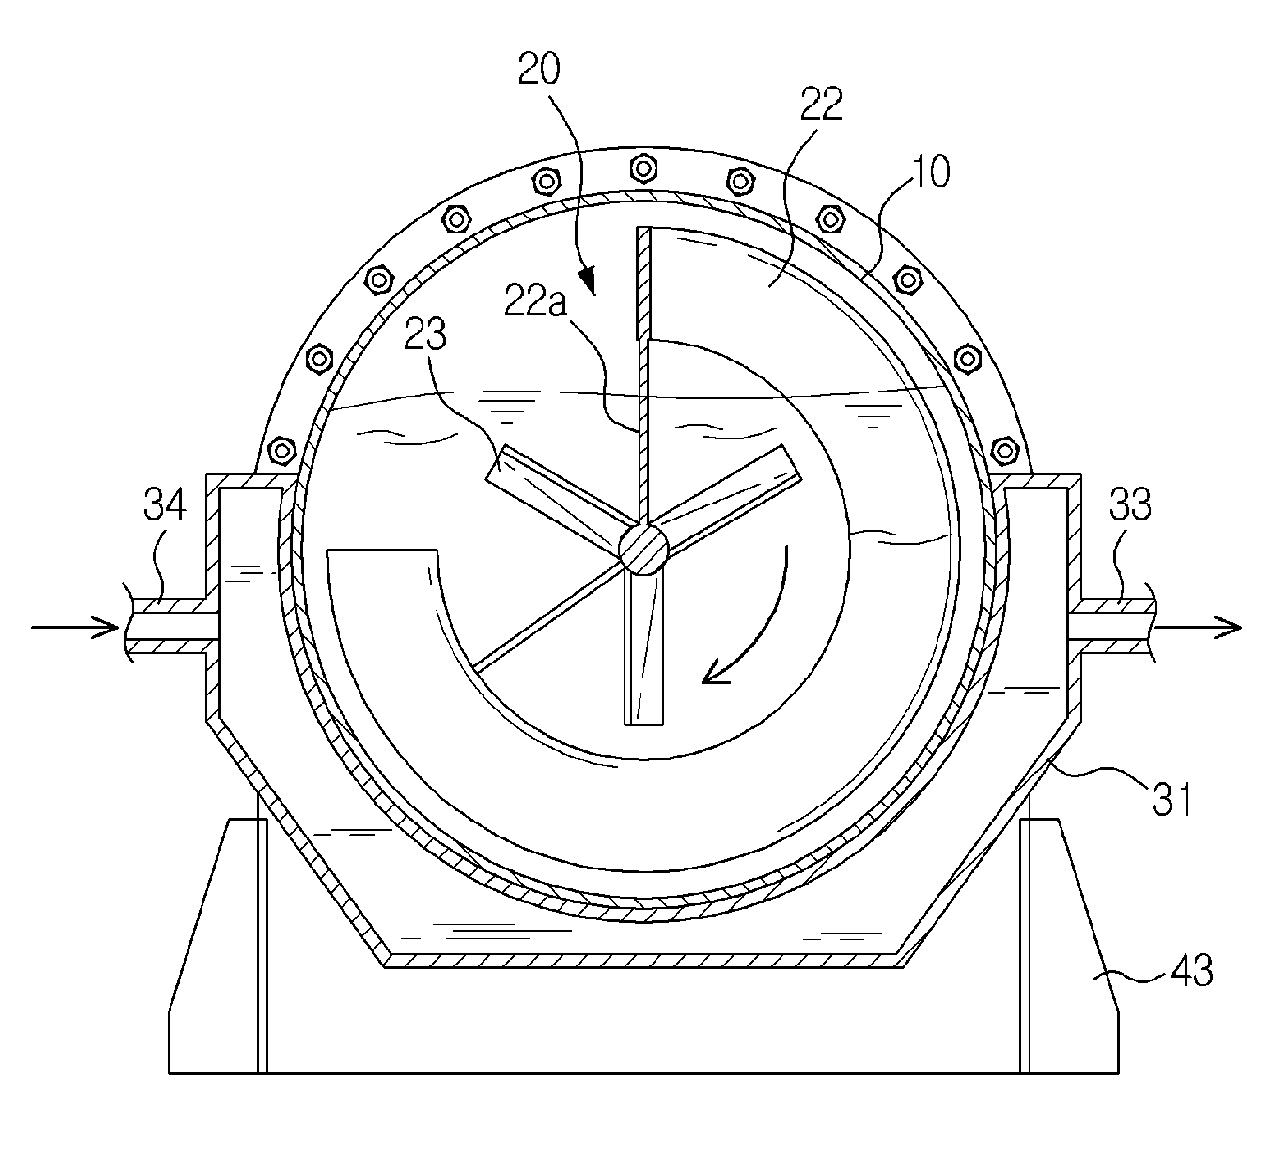 Apparatus and method for treating organic waste